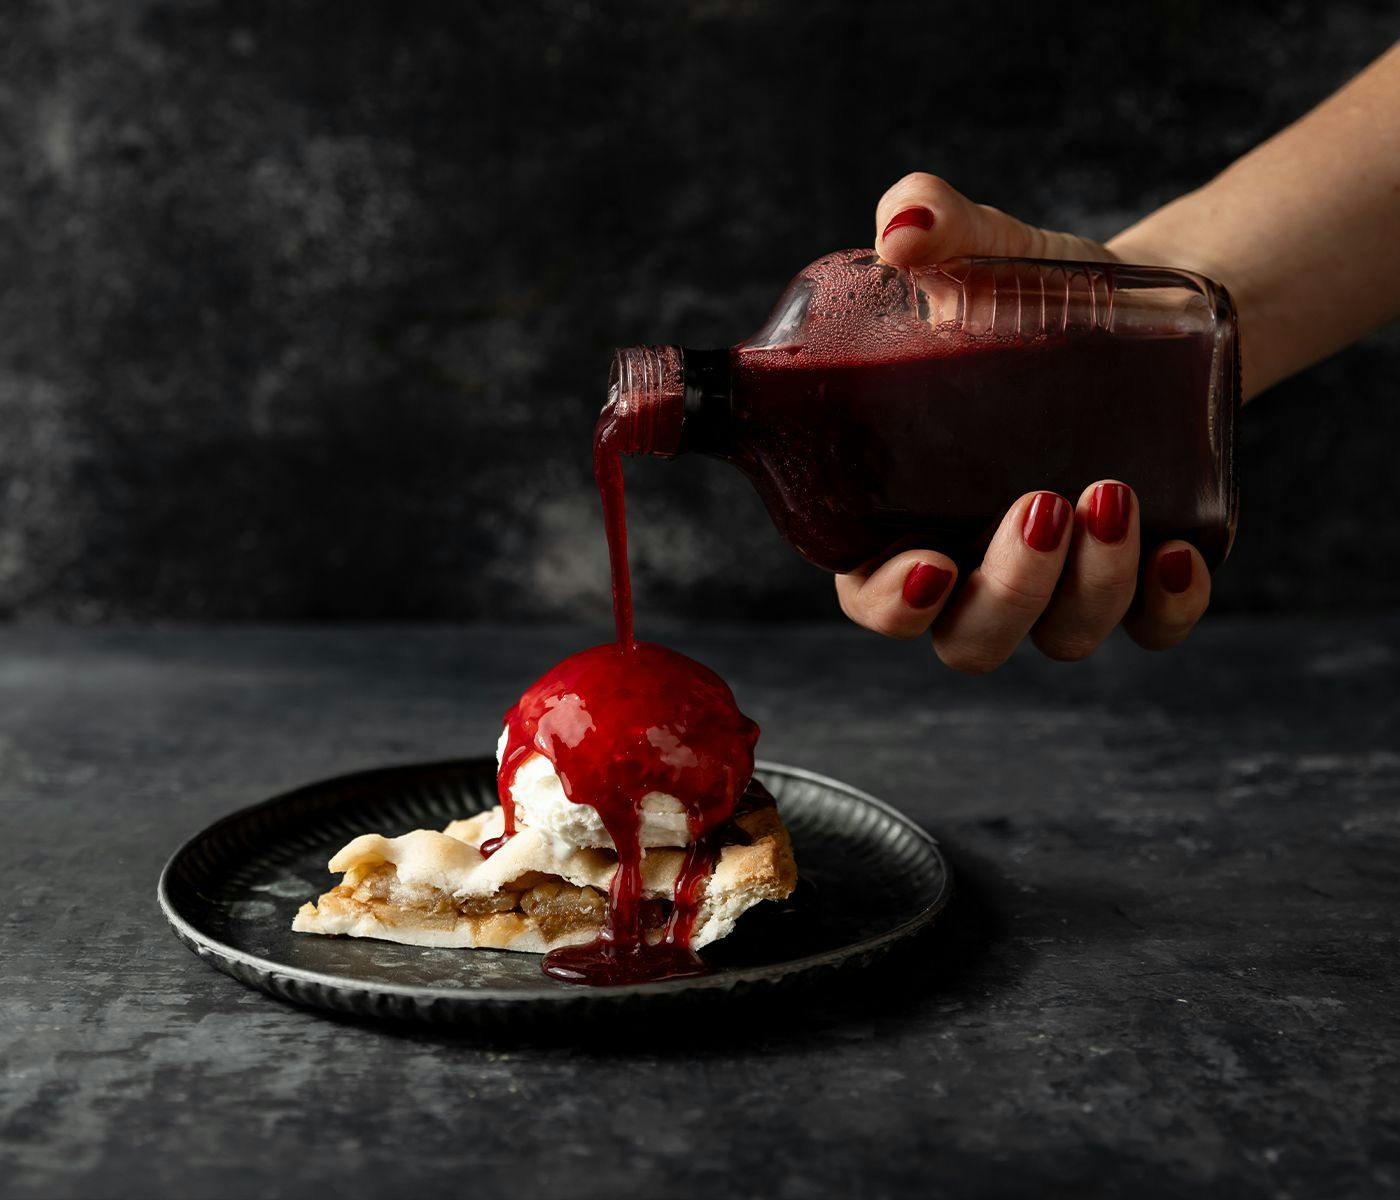 Red raspberry coulis is poured over ice cream and apple pie.